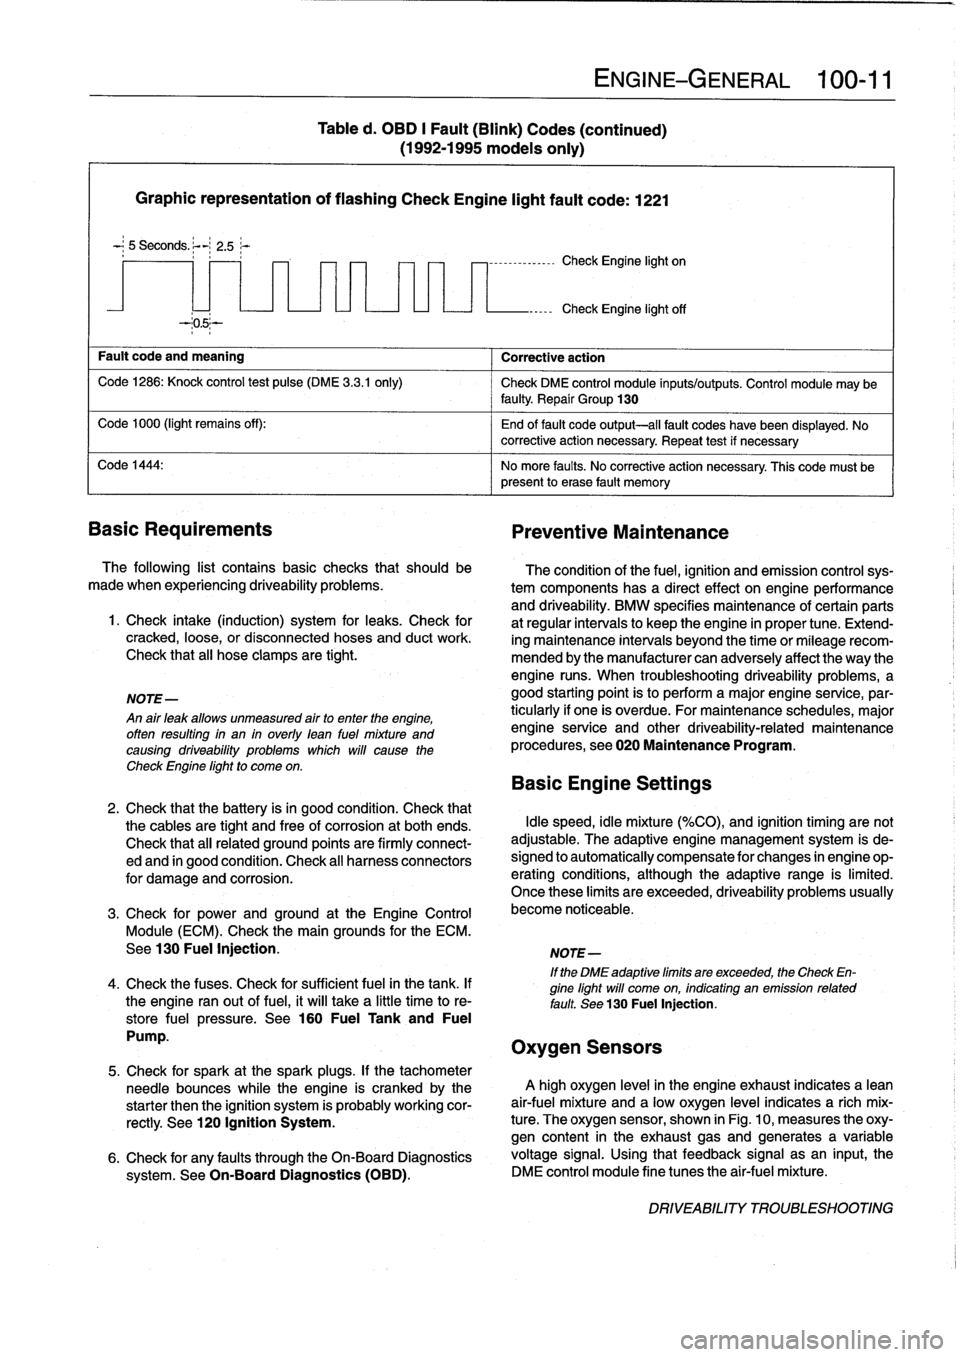 BMW M3 1996 E36 Workshop Manual 
Graphic
representation
of
flashing
Check
Engine
light
fault
code
:
1221

-
;
5
Seconds
.
~-

	

2
.5;-

Fault
code
and
meaning

	

Corrective
action

Code
1286
:
Knock
control
test
pulse
(DME
3
.3
.1